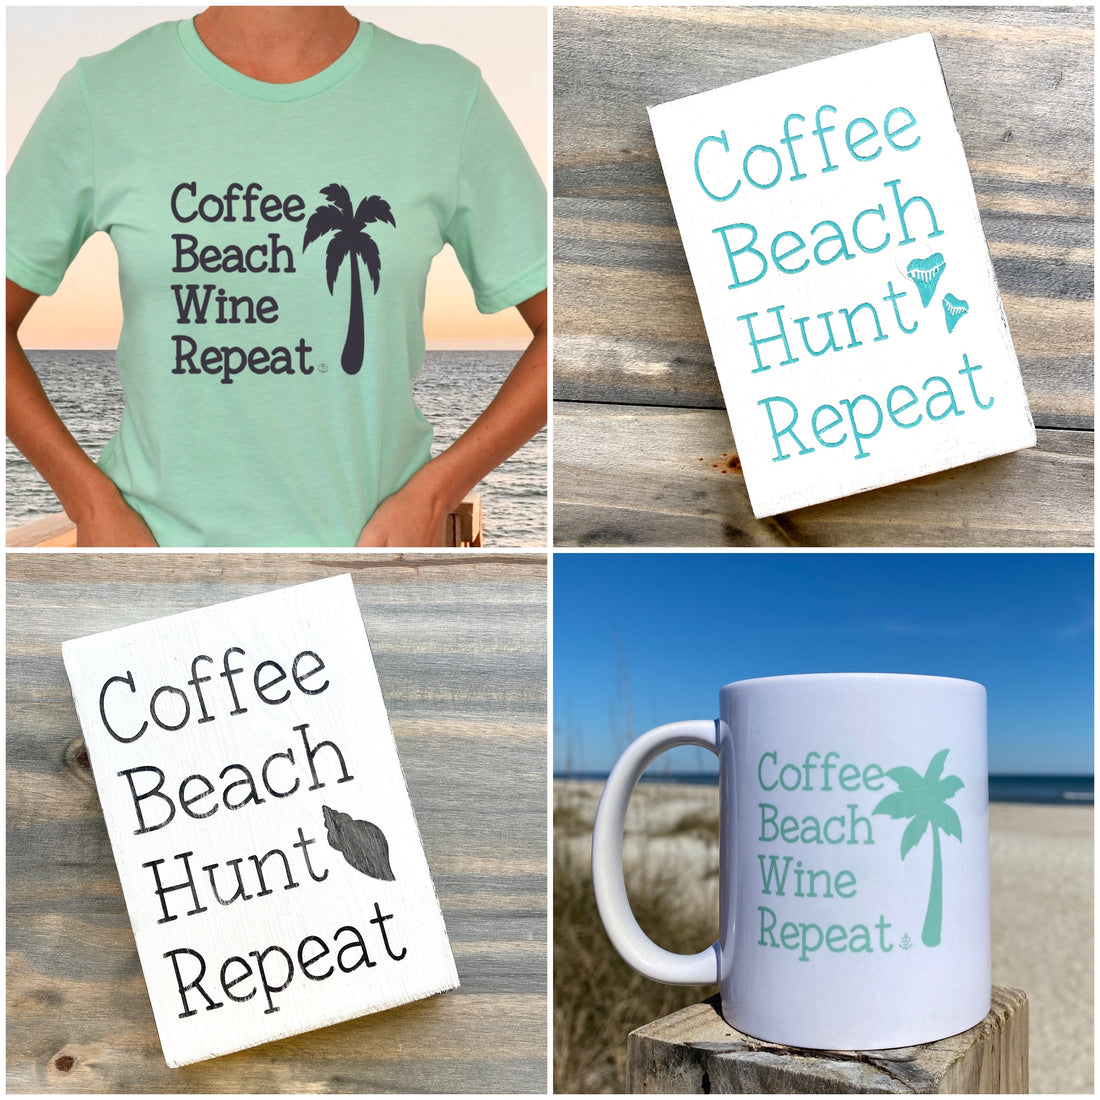 Gifts for the Coffee Lover and Beach Lover in your life